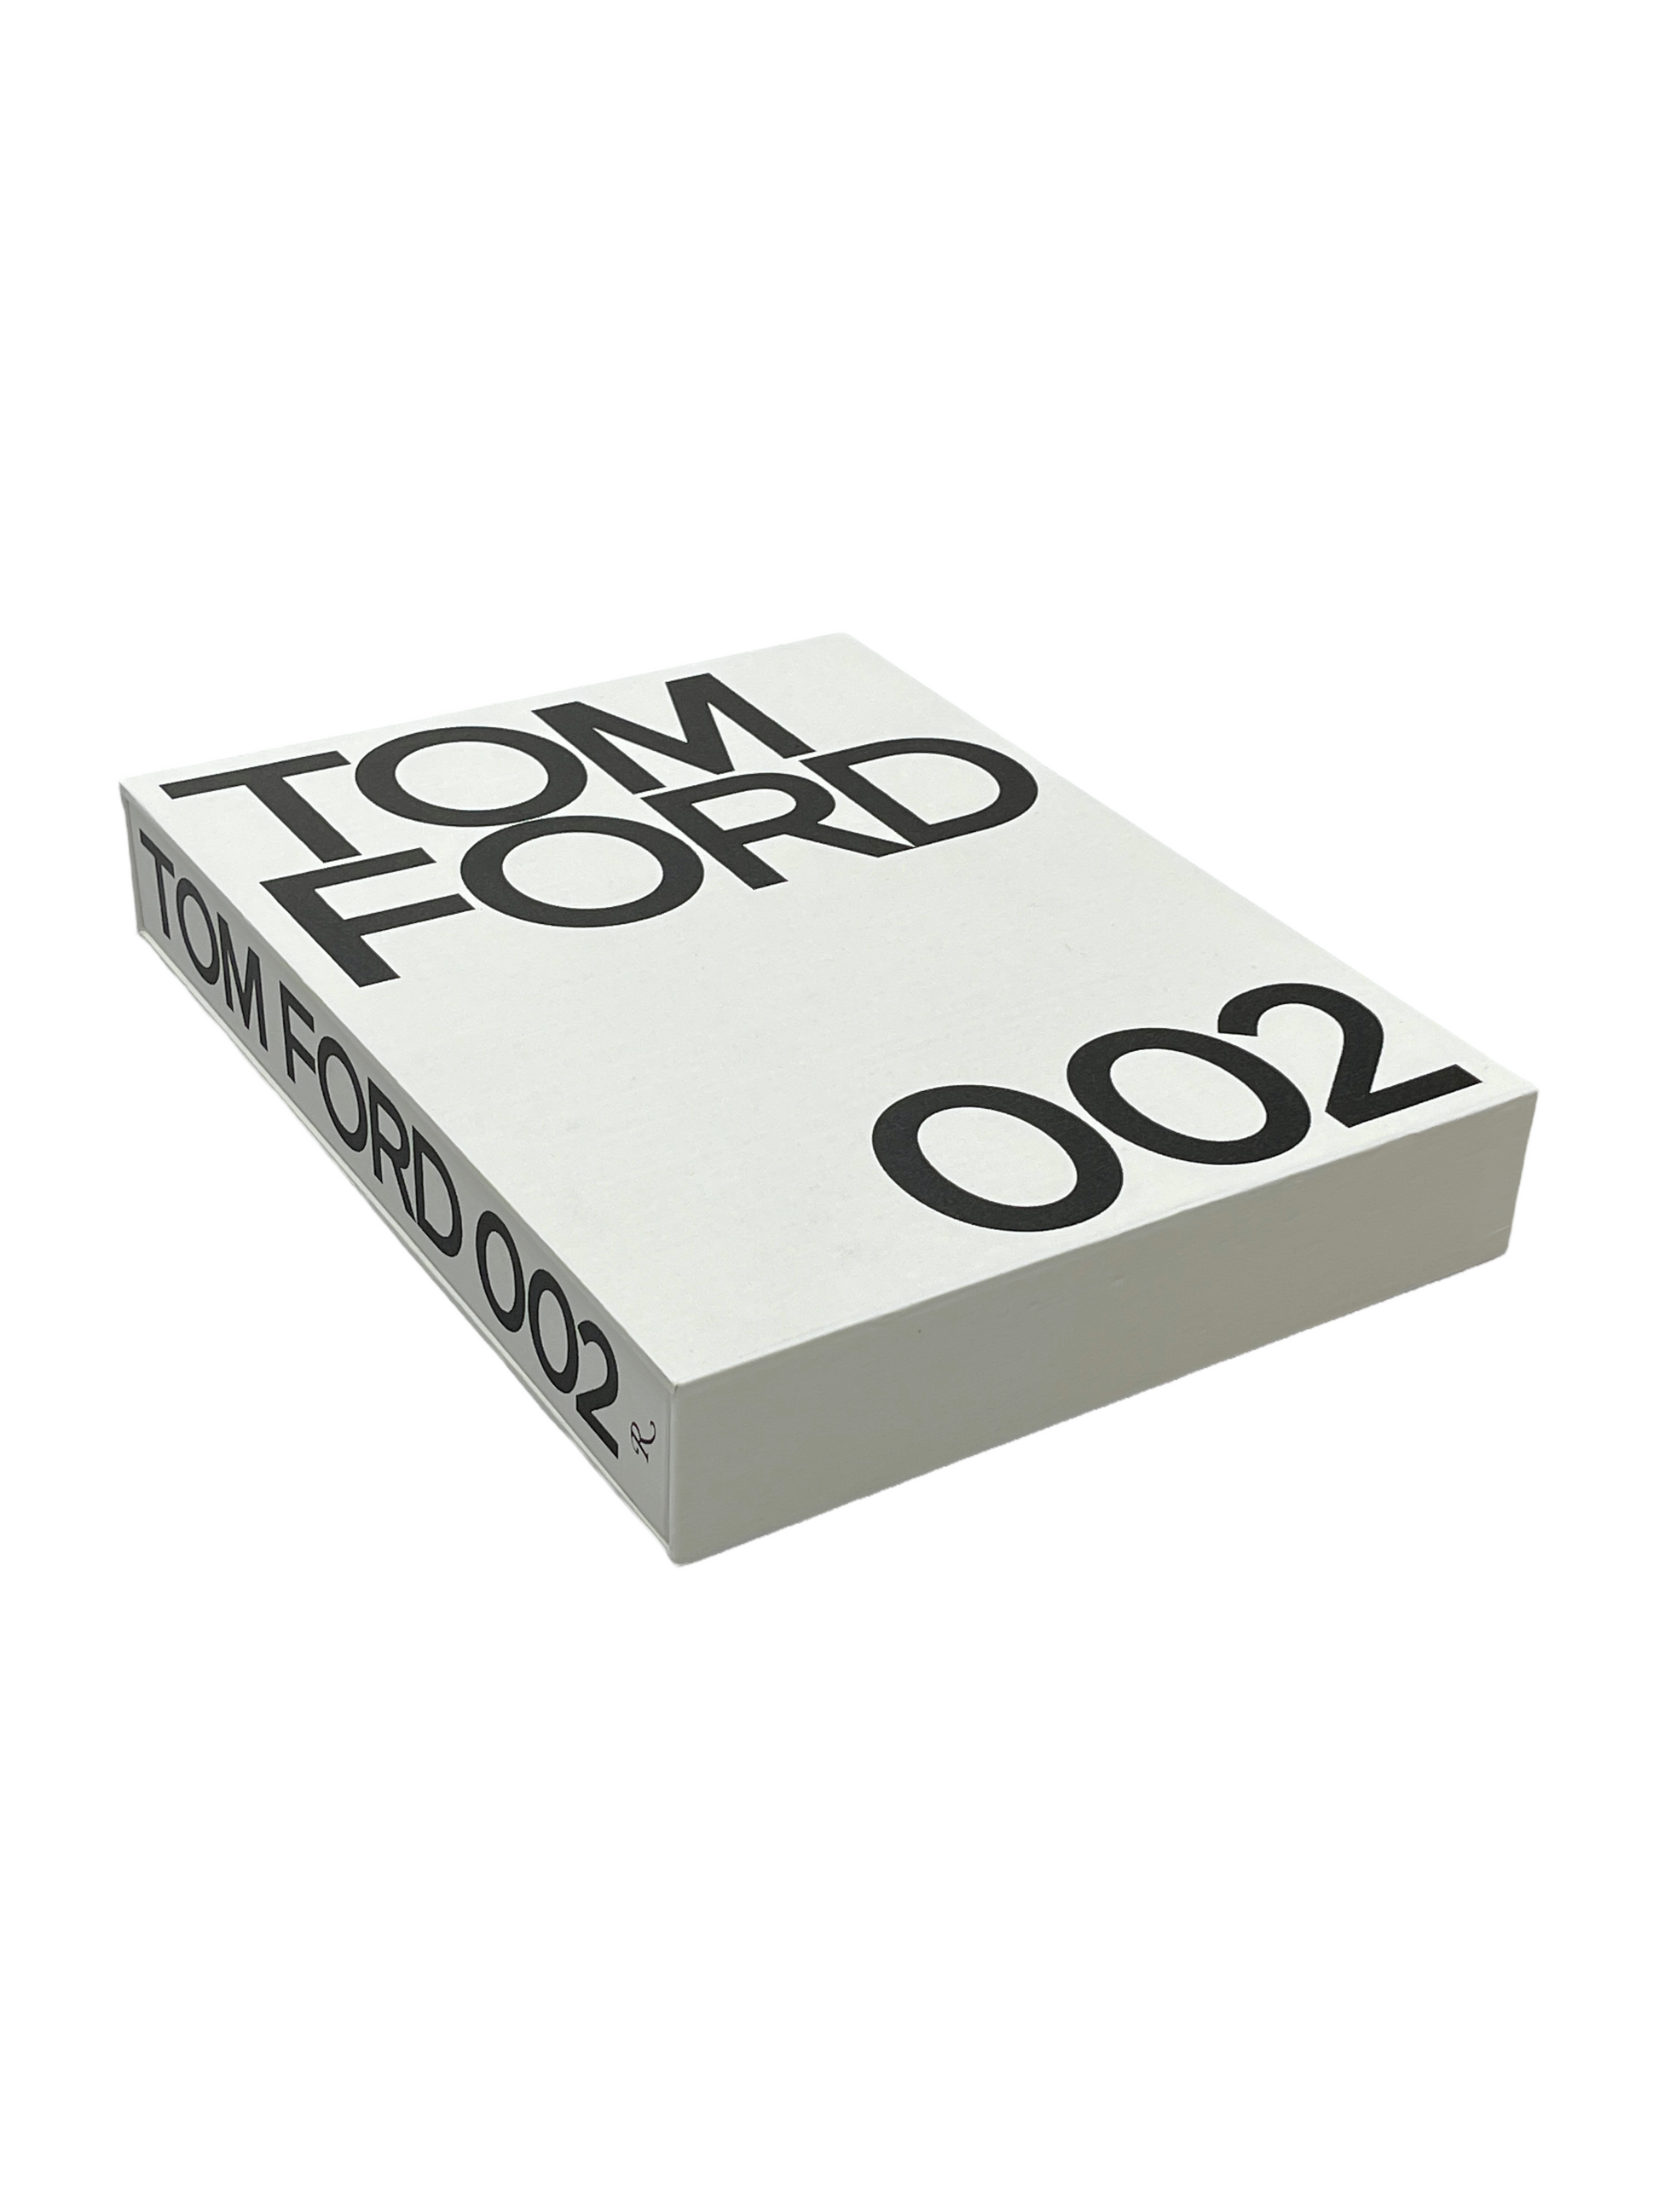 TOM FORD: 002 Coffee Table Book —Genuine Design luxury consignment Calgary, Alberta, Canada New and pre-owned clothing, shoes, accessories.